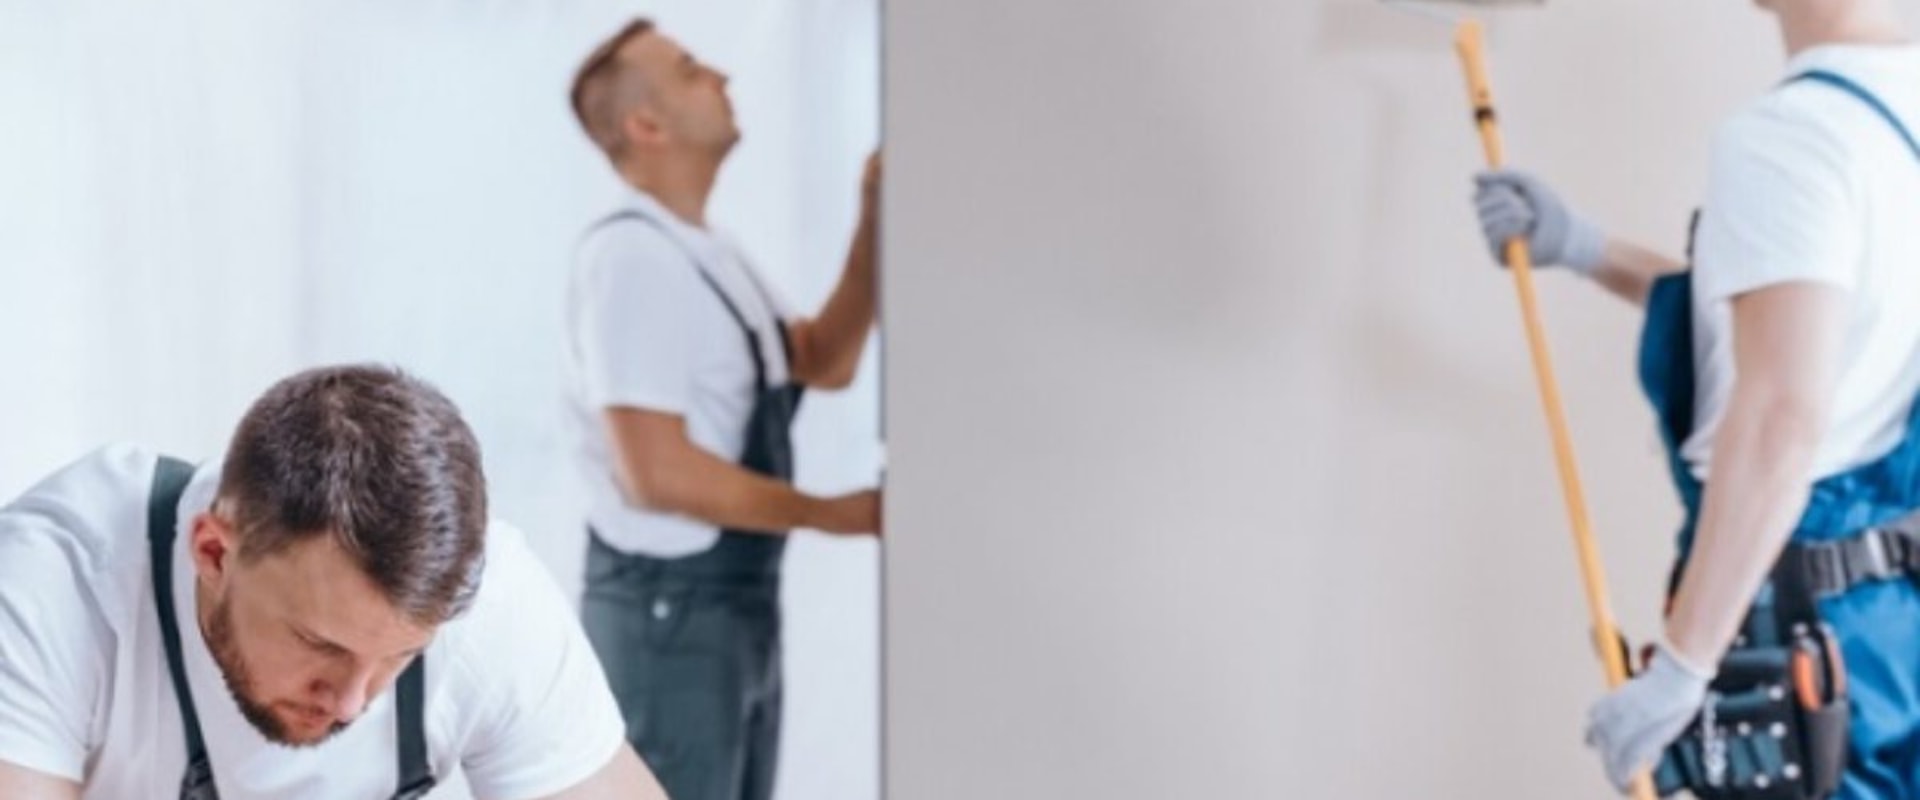 Types of Painting Contractors - What You Need to Know